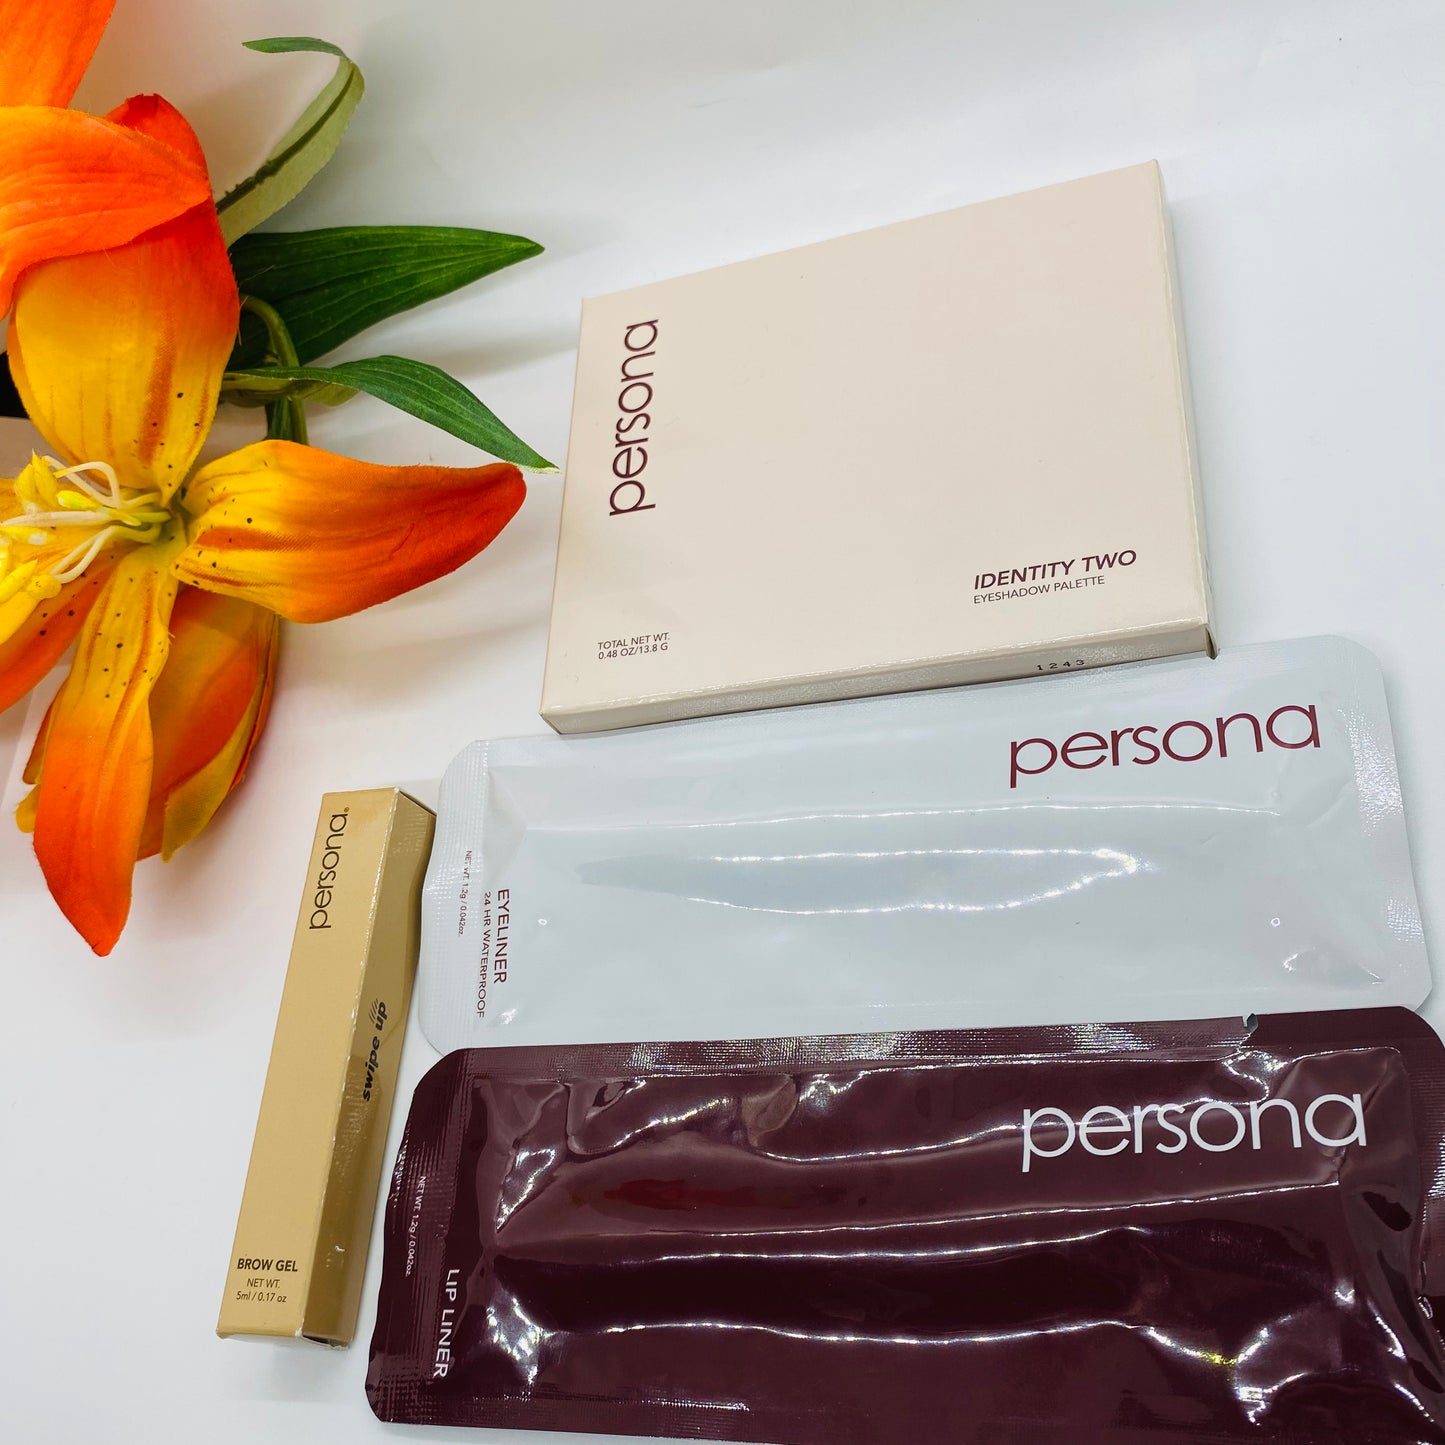 The Persona Complete Luxury Face Bundle